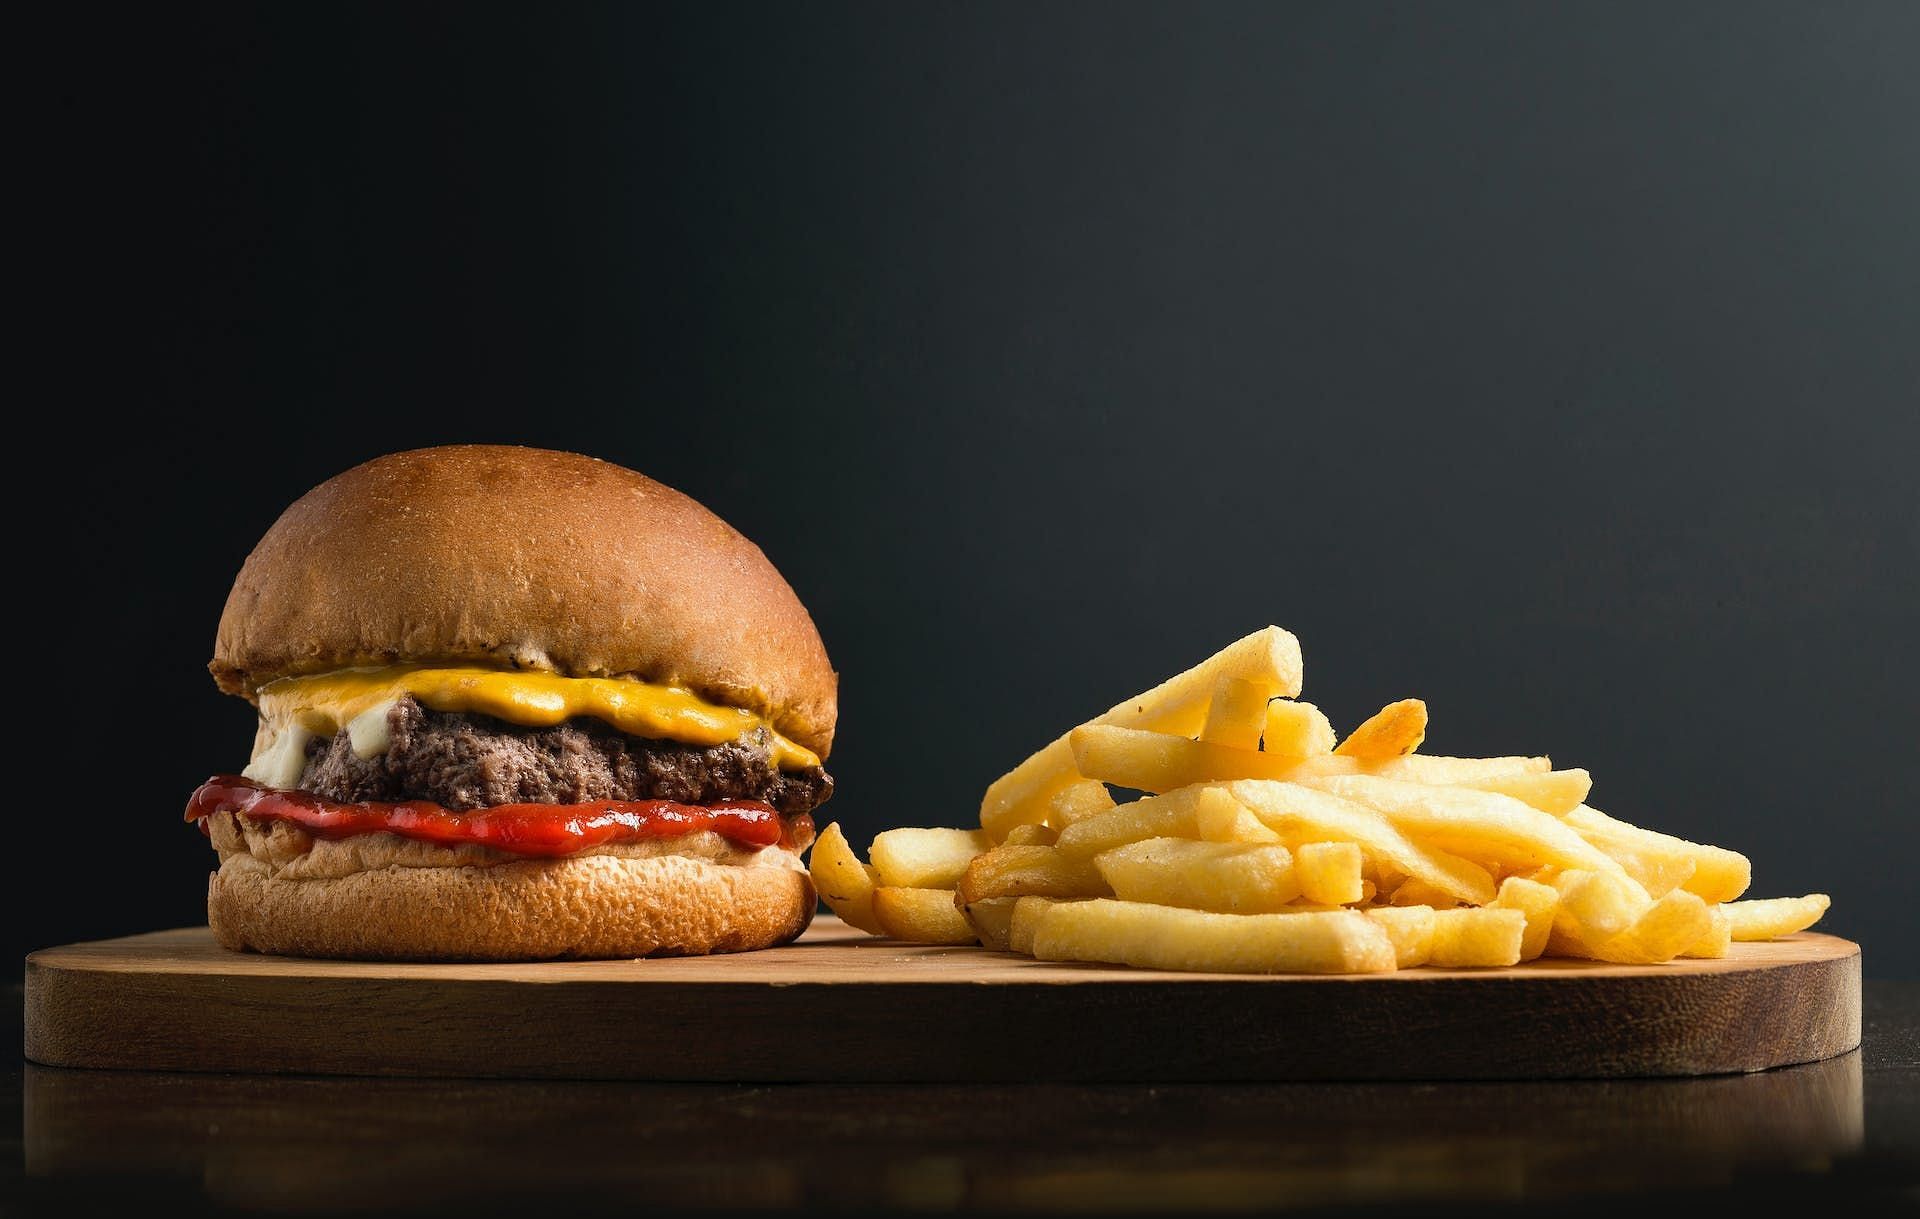 Fast food options are unhealthy breakfast choices. (Image via Pexels/Daniel Reche)